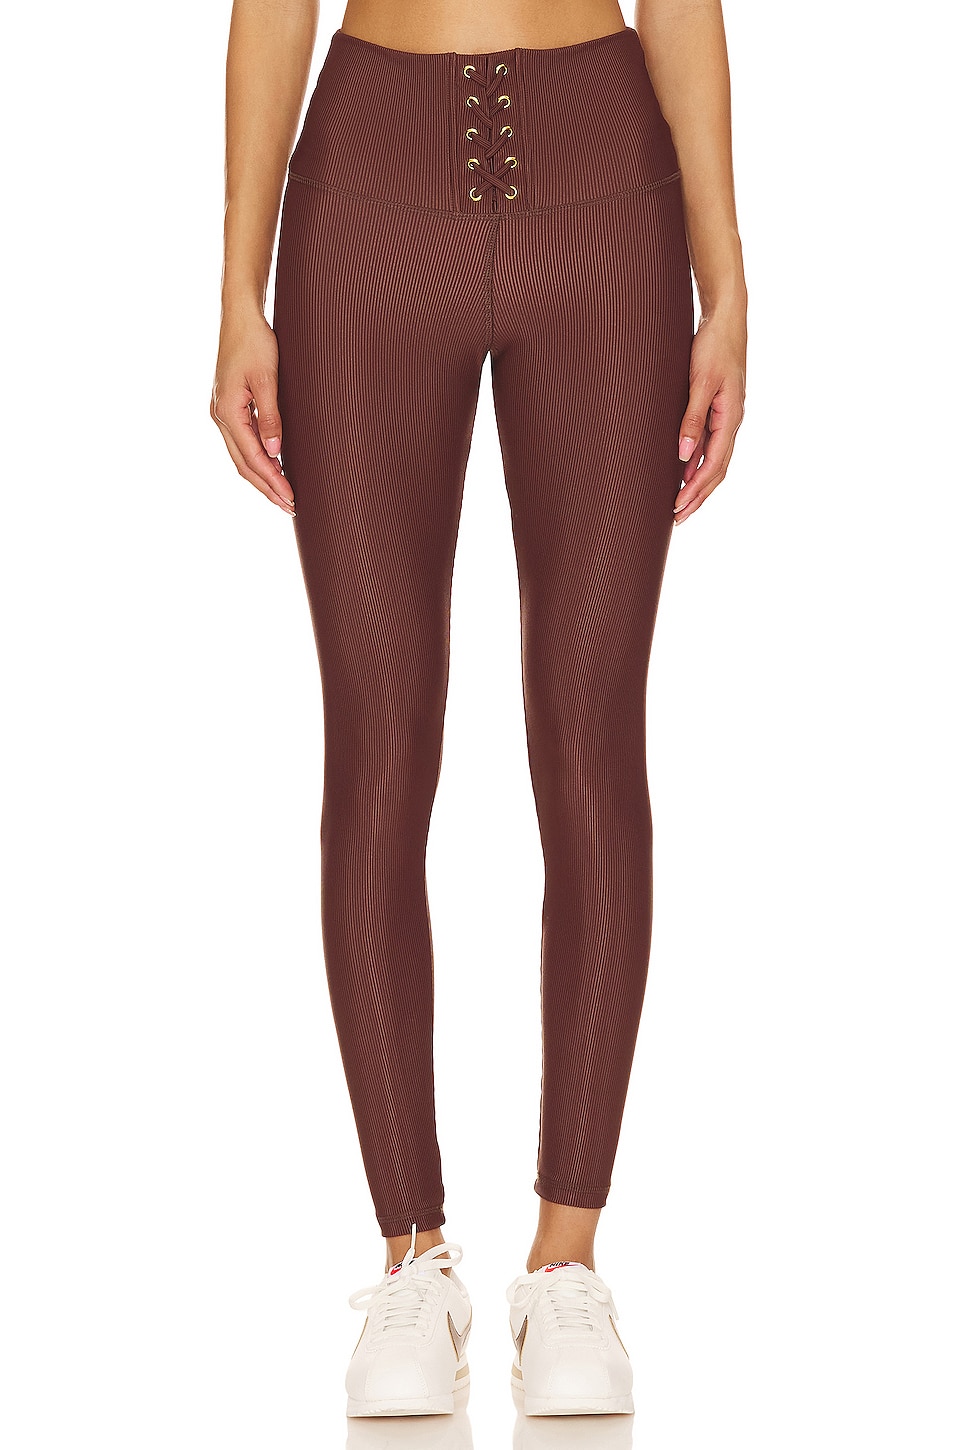 STRUT-THIS X Chantelle Paige-Mulligan The Liam Ankle Legging in Chocolate  Rib